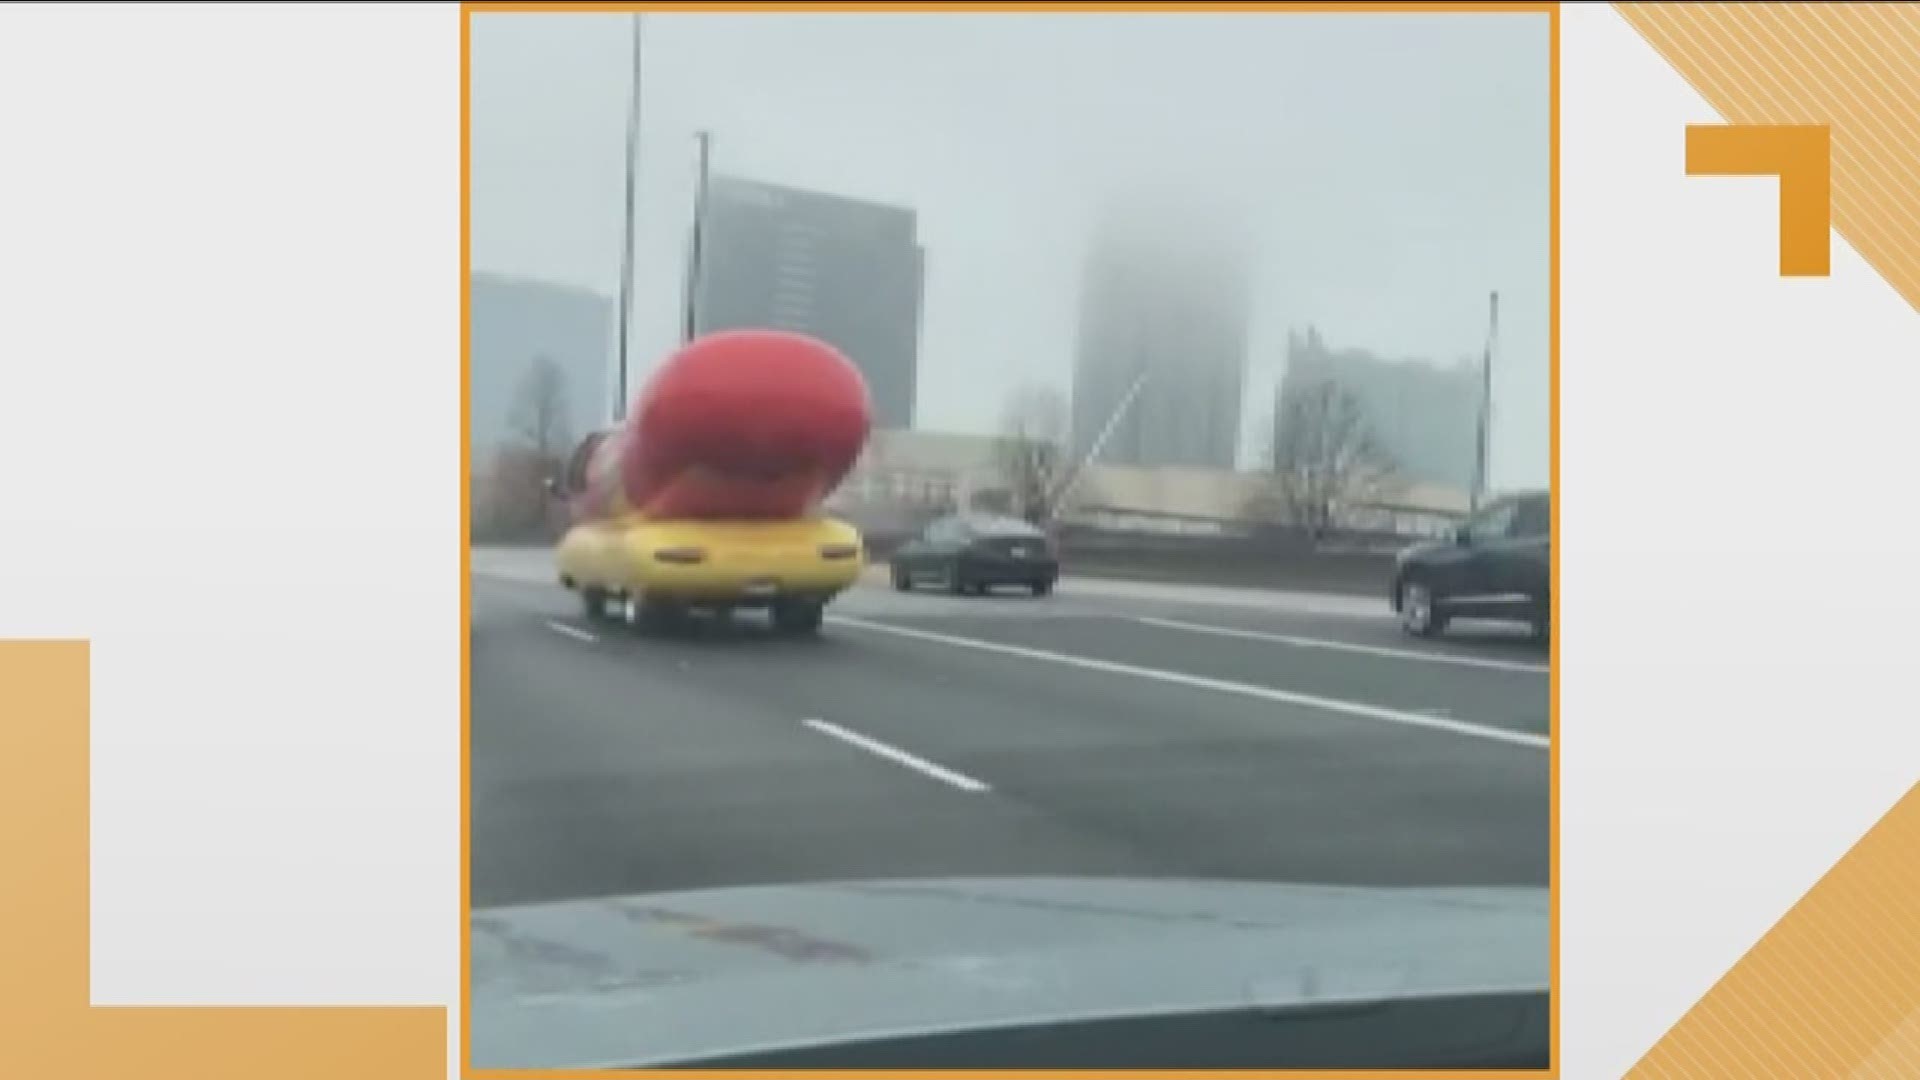 Have you seen the Wienermobile before?